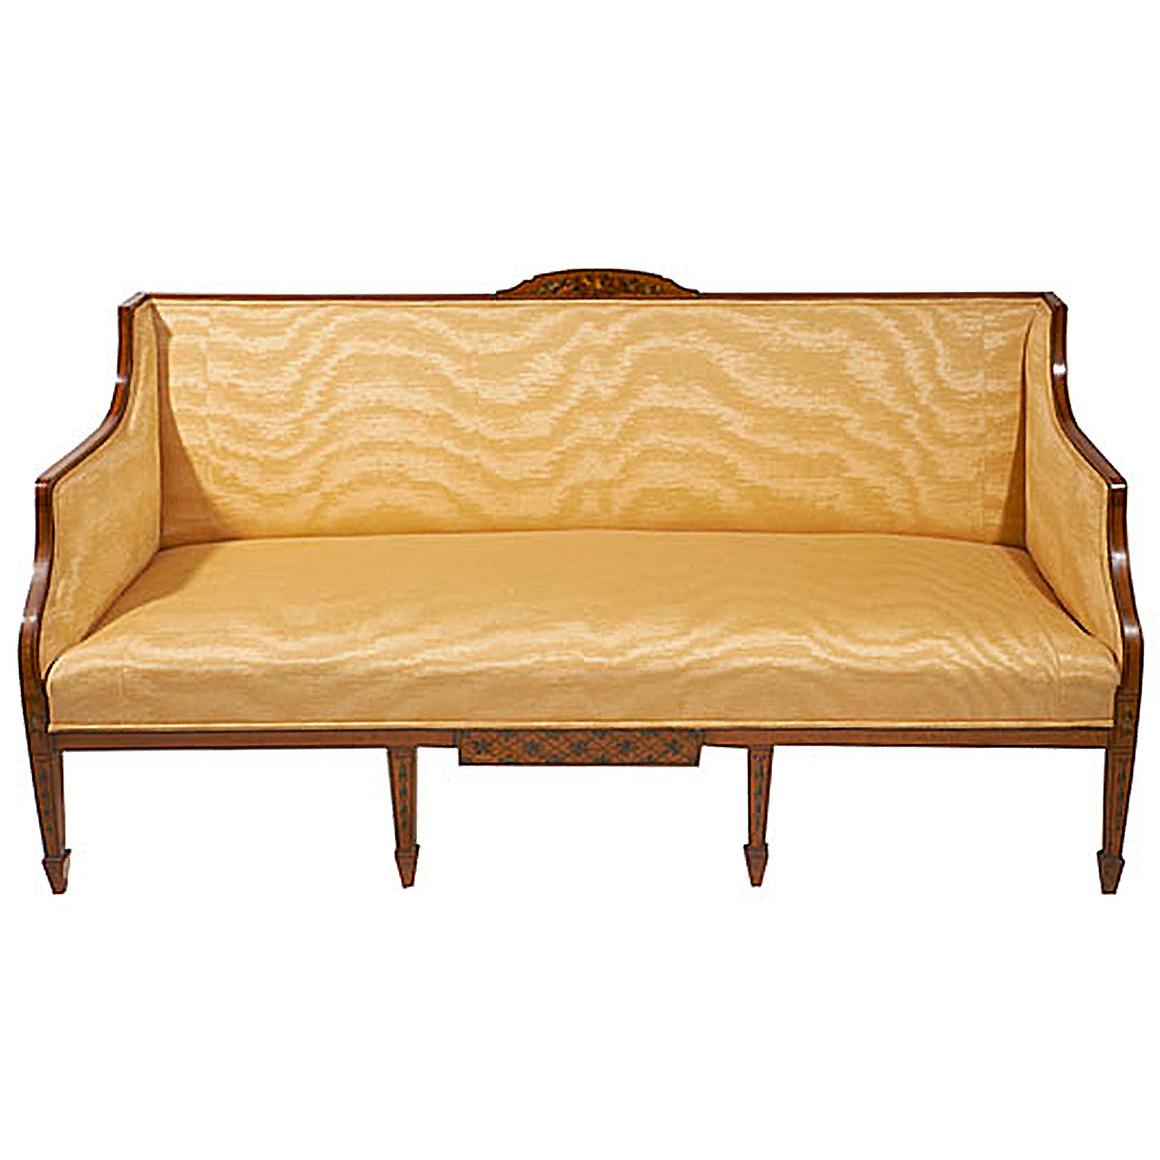 High Victorian 19th Century Satinwood Box Sofa For Sale